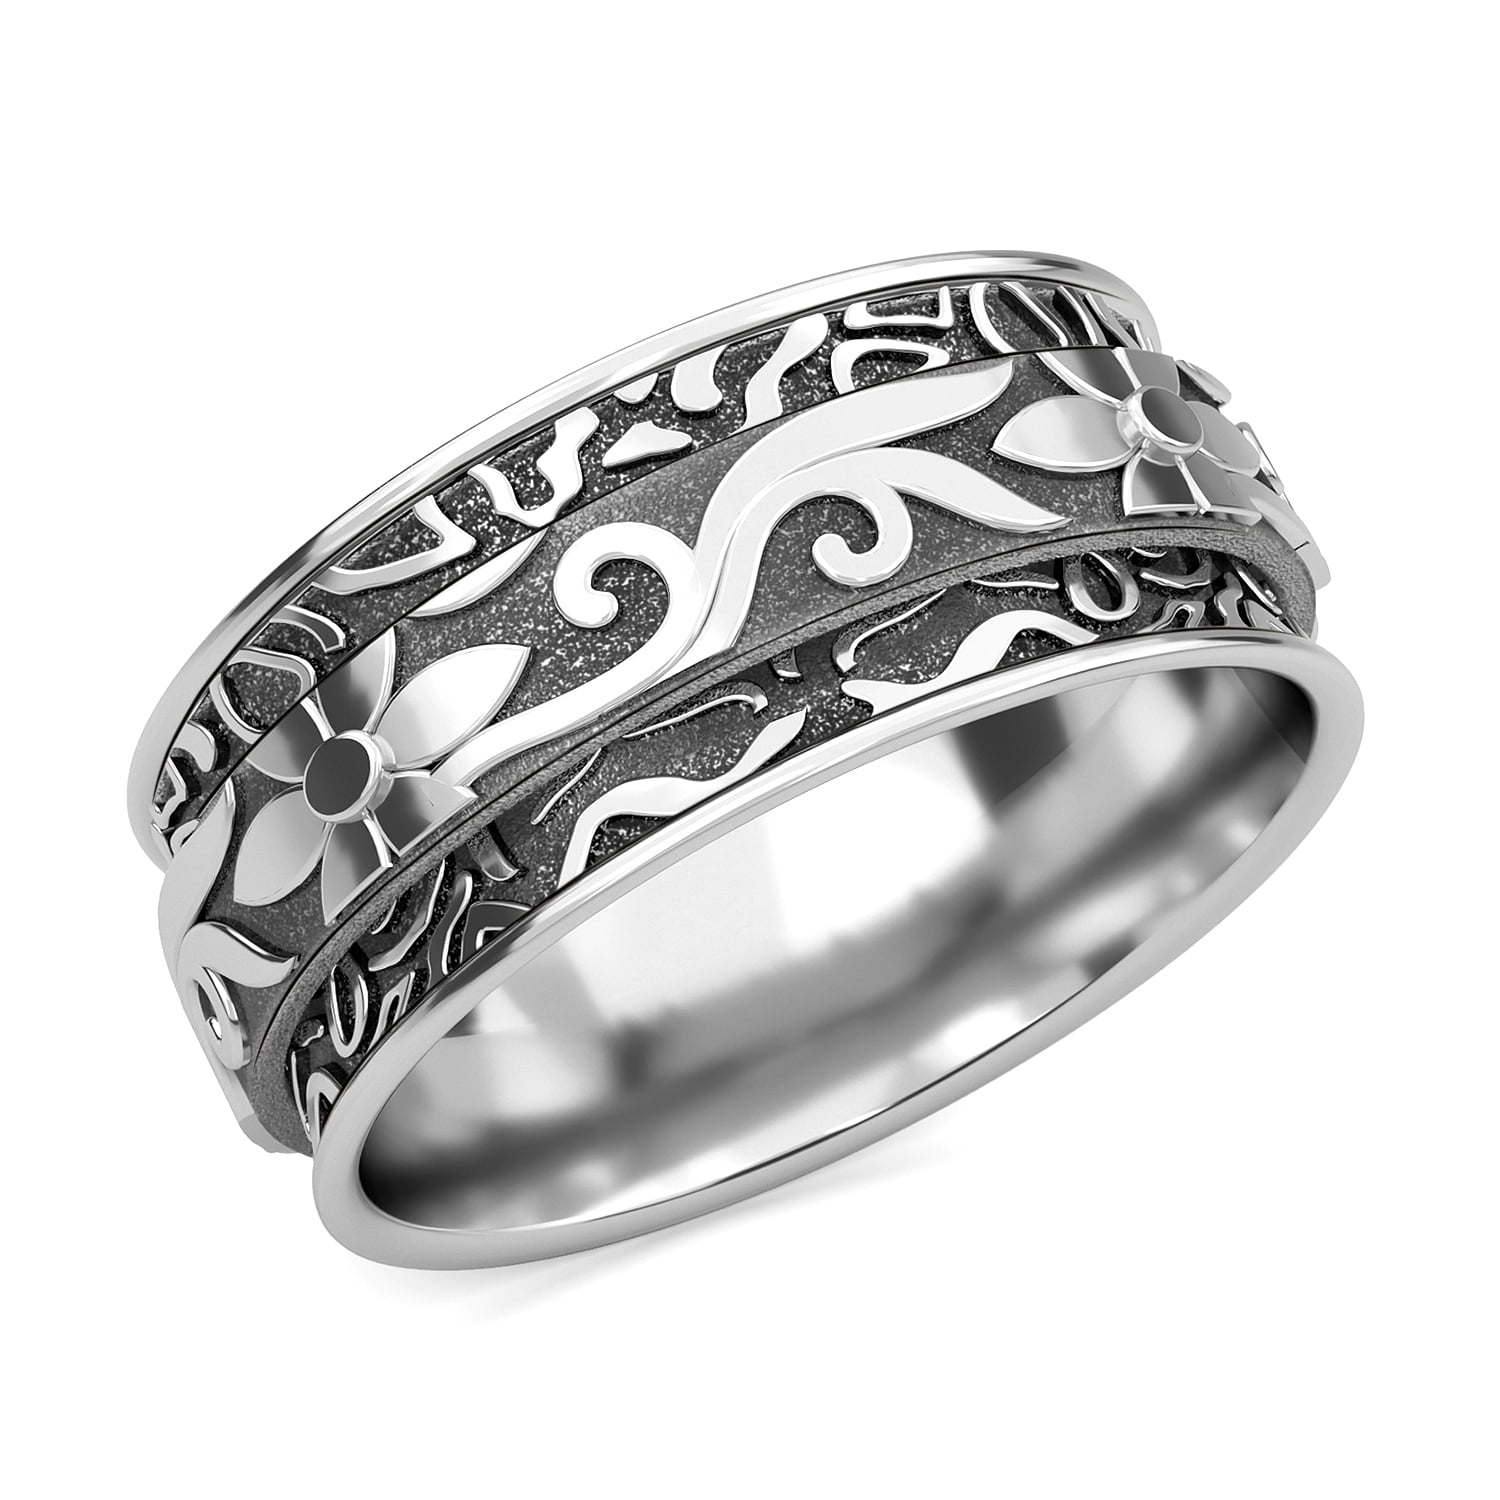 Spinner Ring For Women 925 Silver Ring Fidget Ring Perfect Gift For Her Spinning Ring Anxiety Ring Worry Ring Boho Ring Spinner Ring